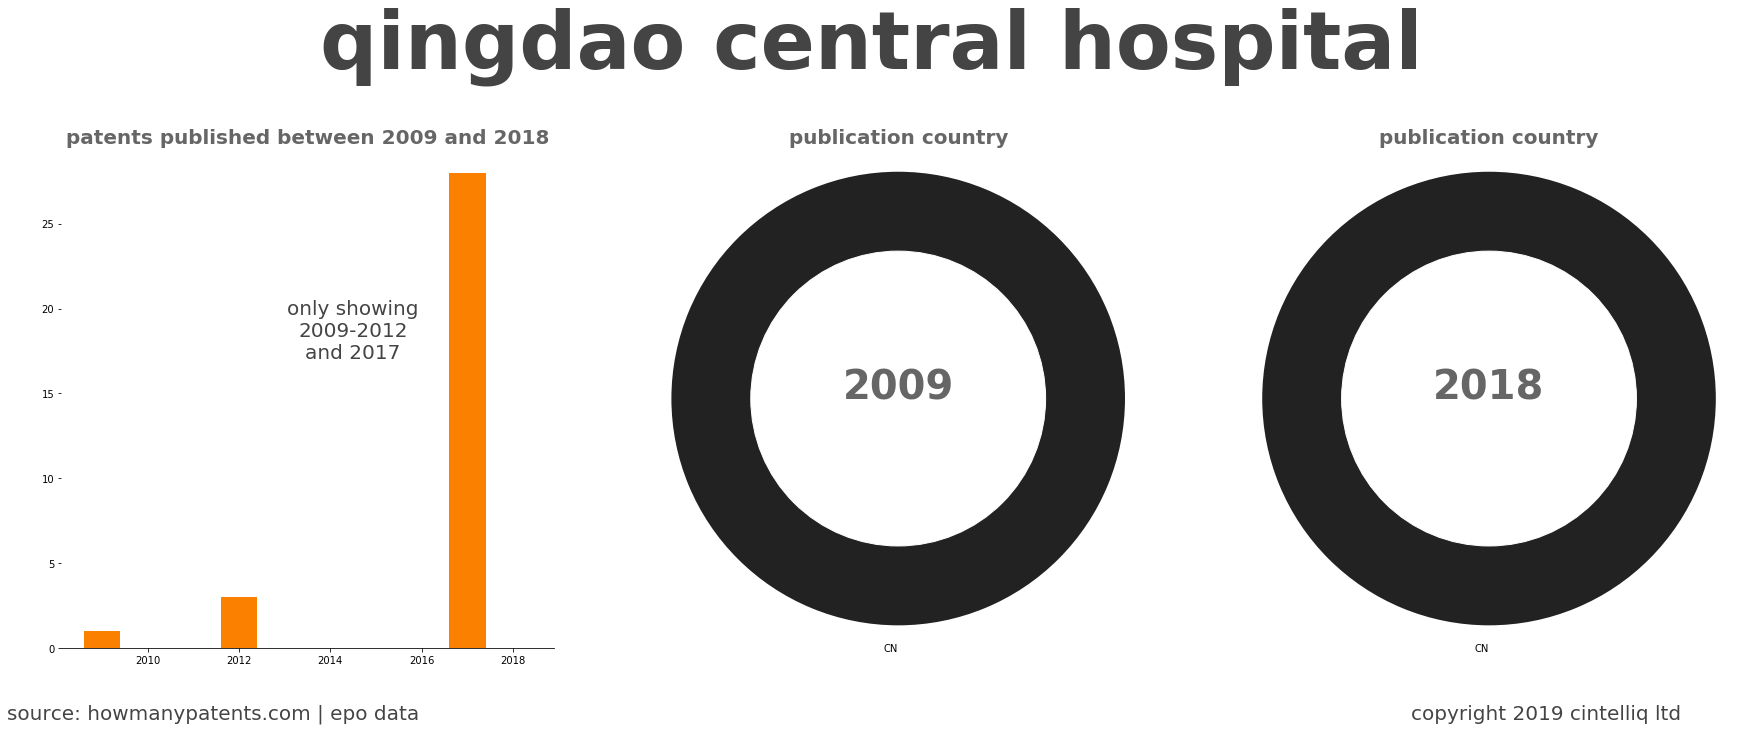 summary of patents for Qingdao Central Hospital